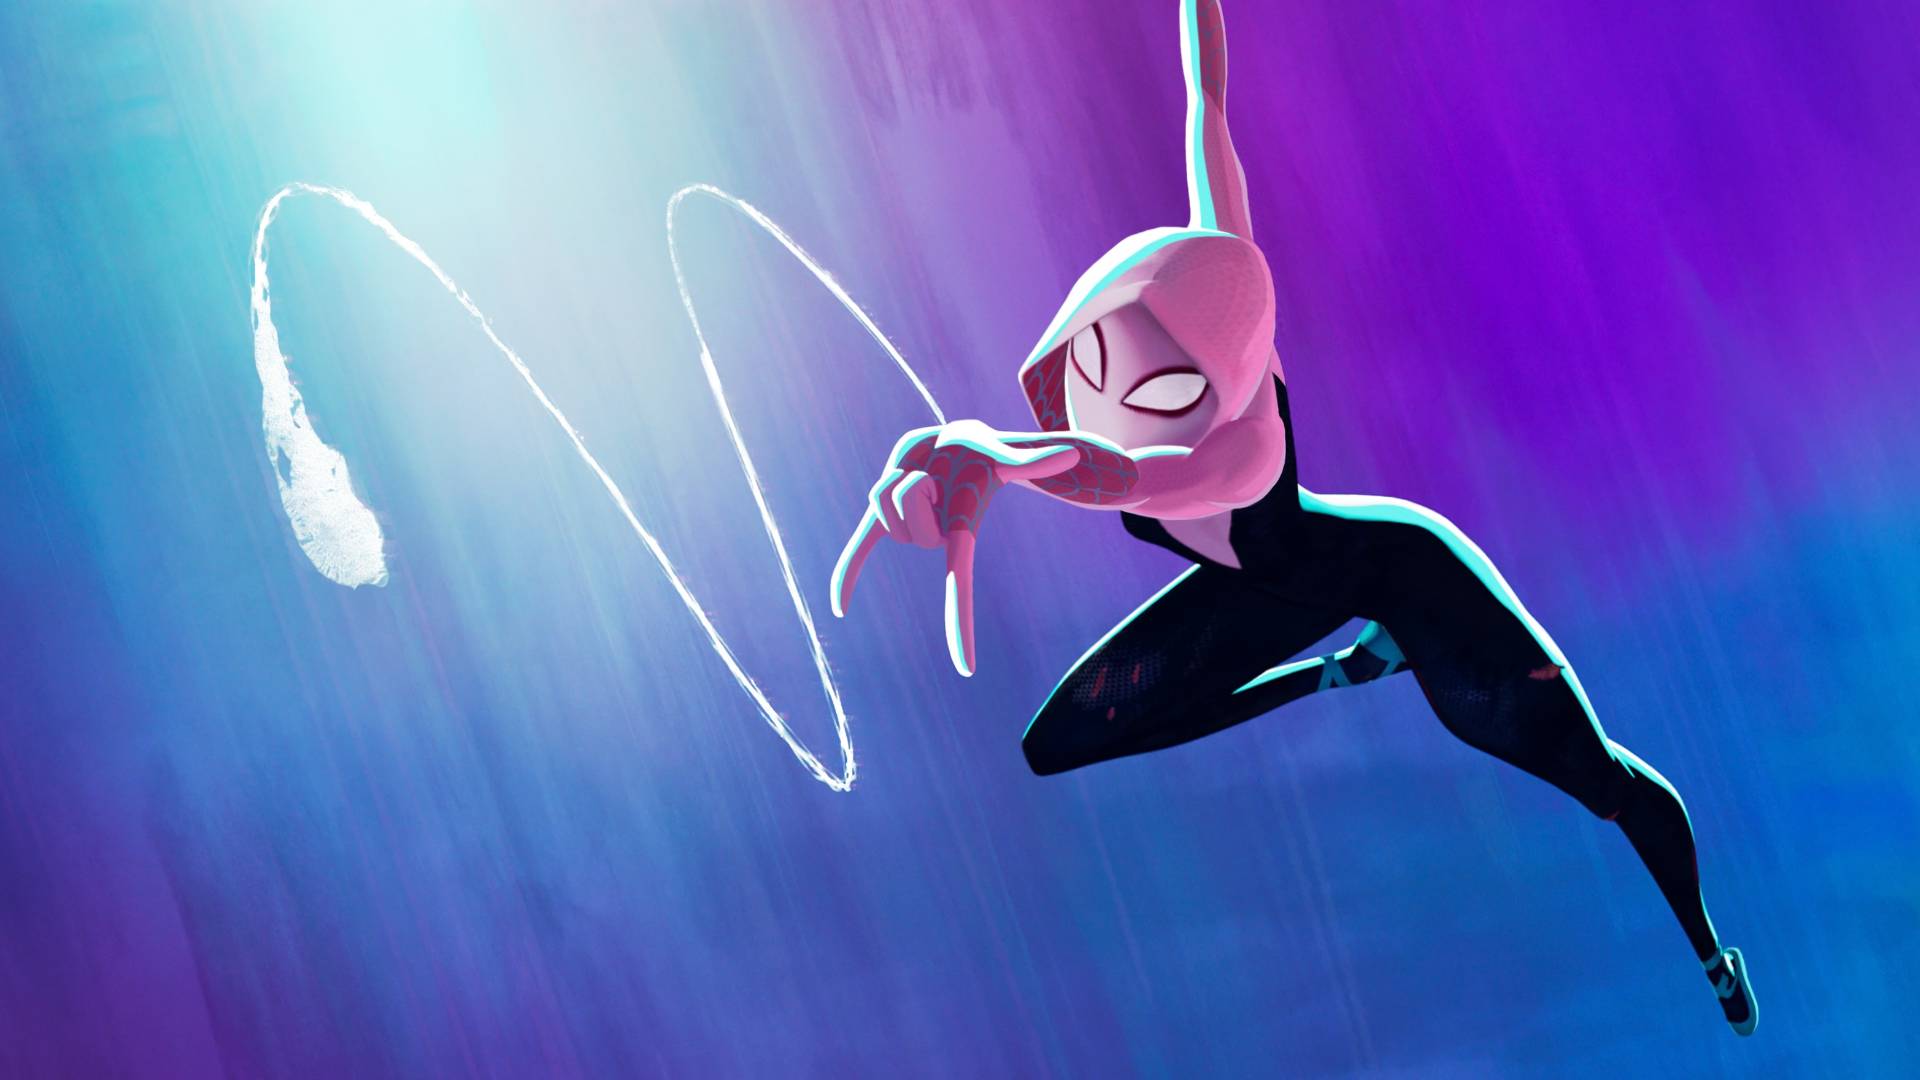 40 SPIDERMAN CAMEOS Spotted in Across the Spider Verse Poster